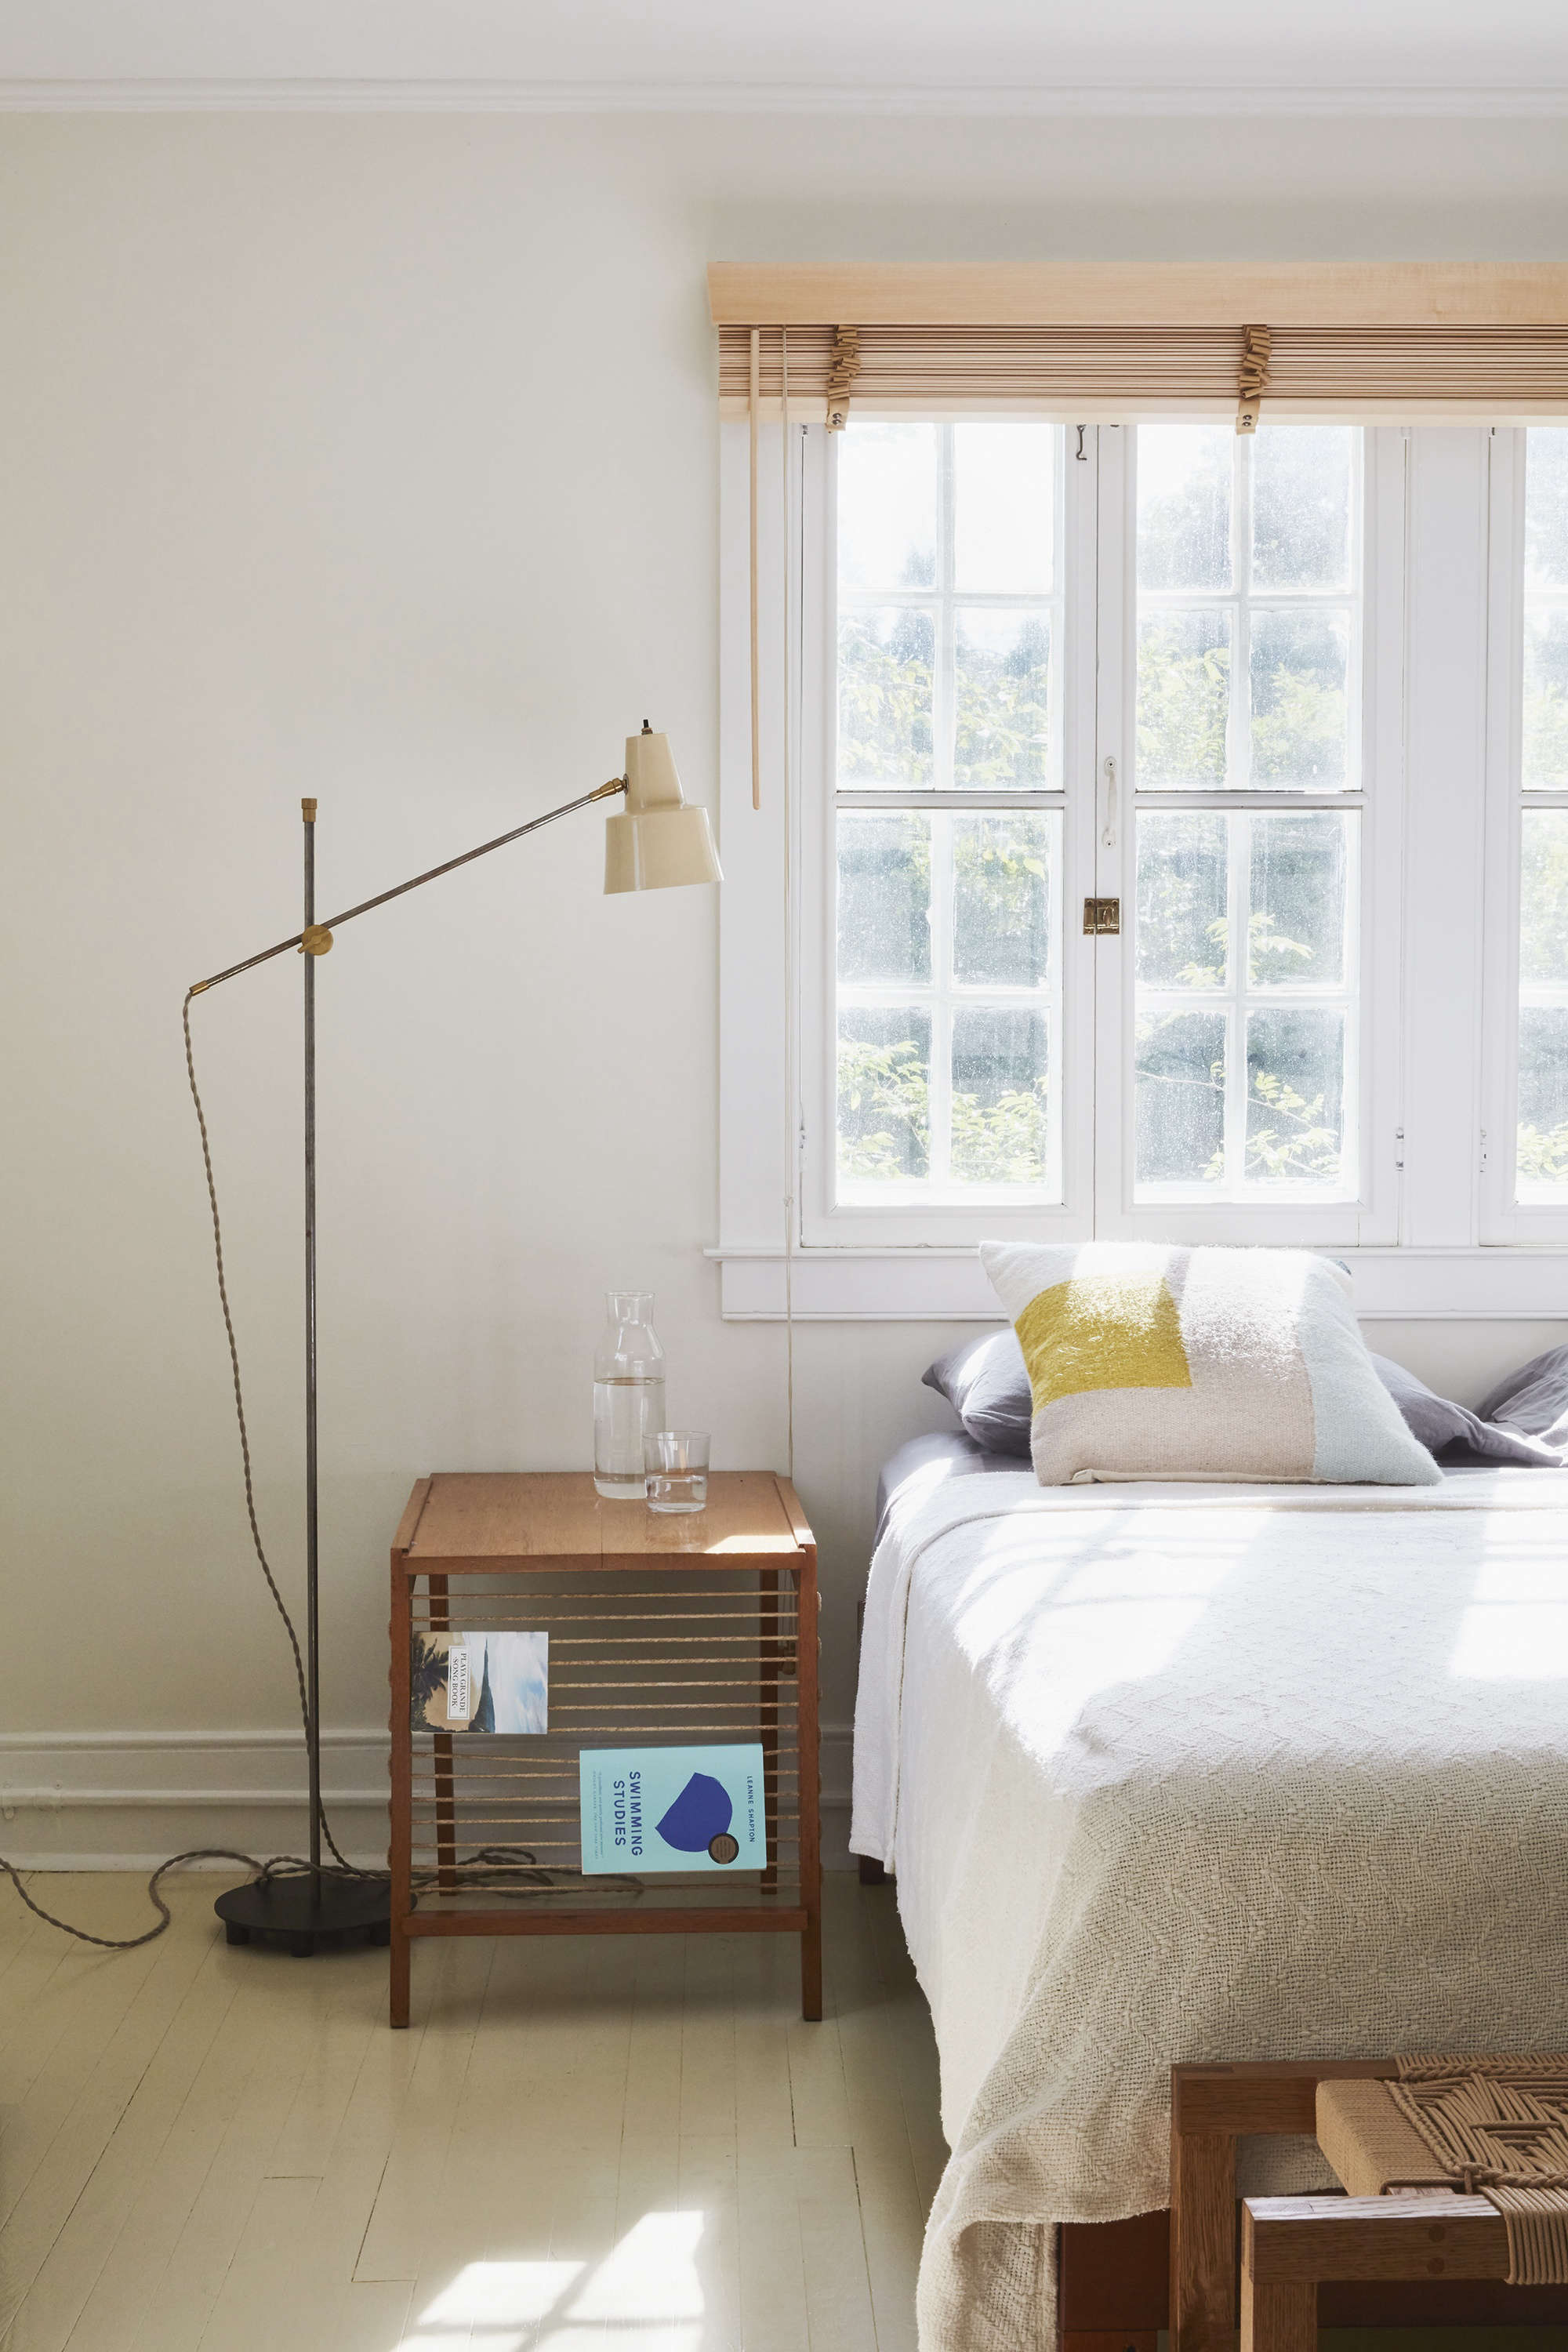 Remodeling 101 Bedside Lighting, What Is The Correct Height For Bedside Table Lamps